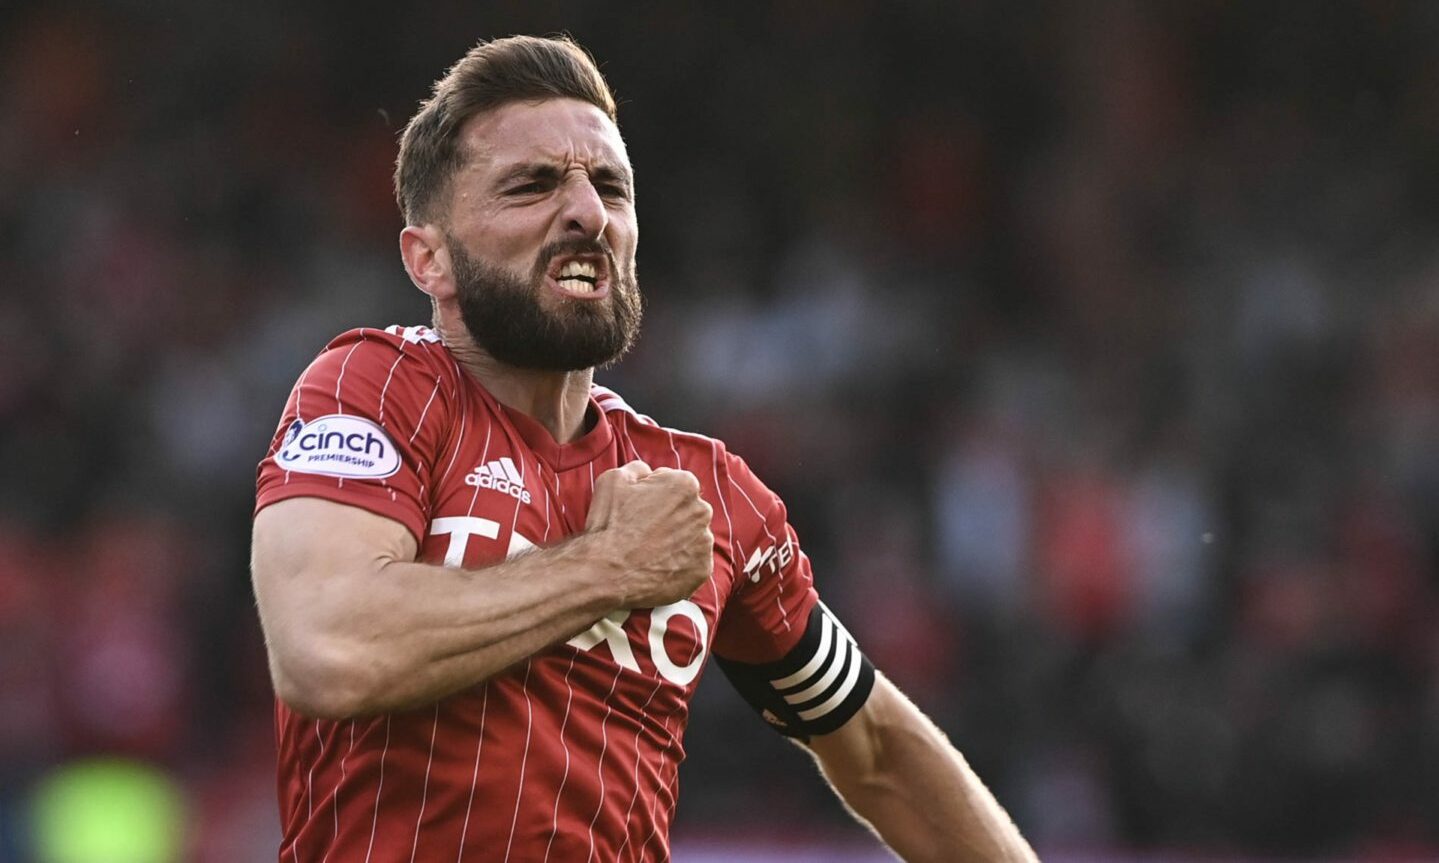 Aberdeen's Graeme Shinnie, who Aberdeen are looking to make a deal for